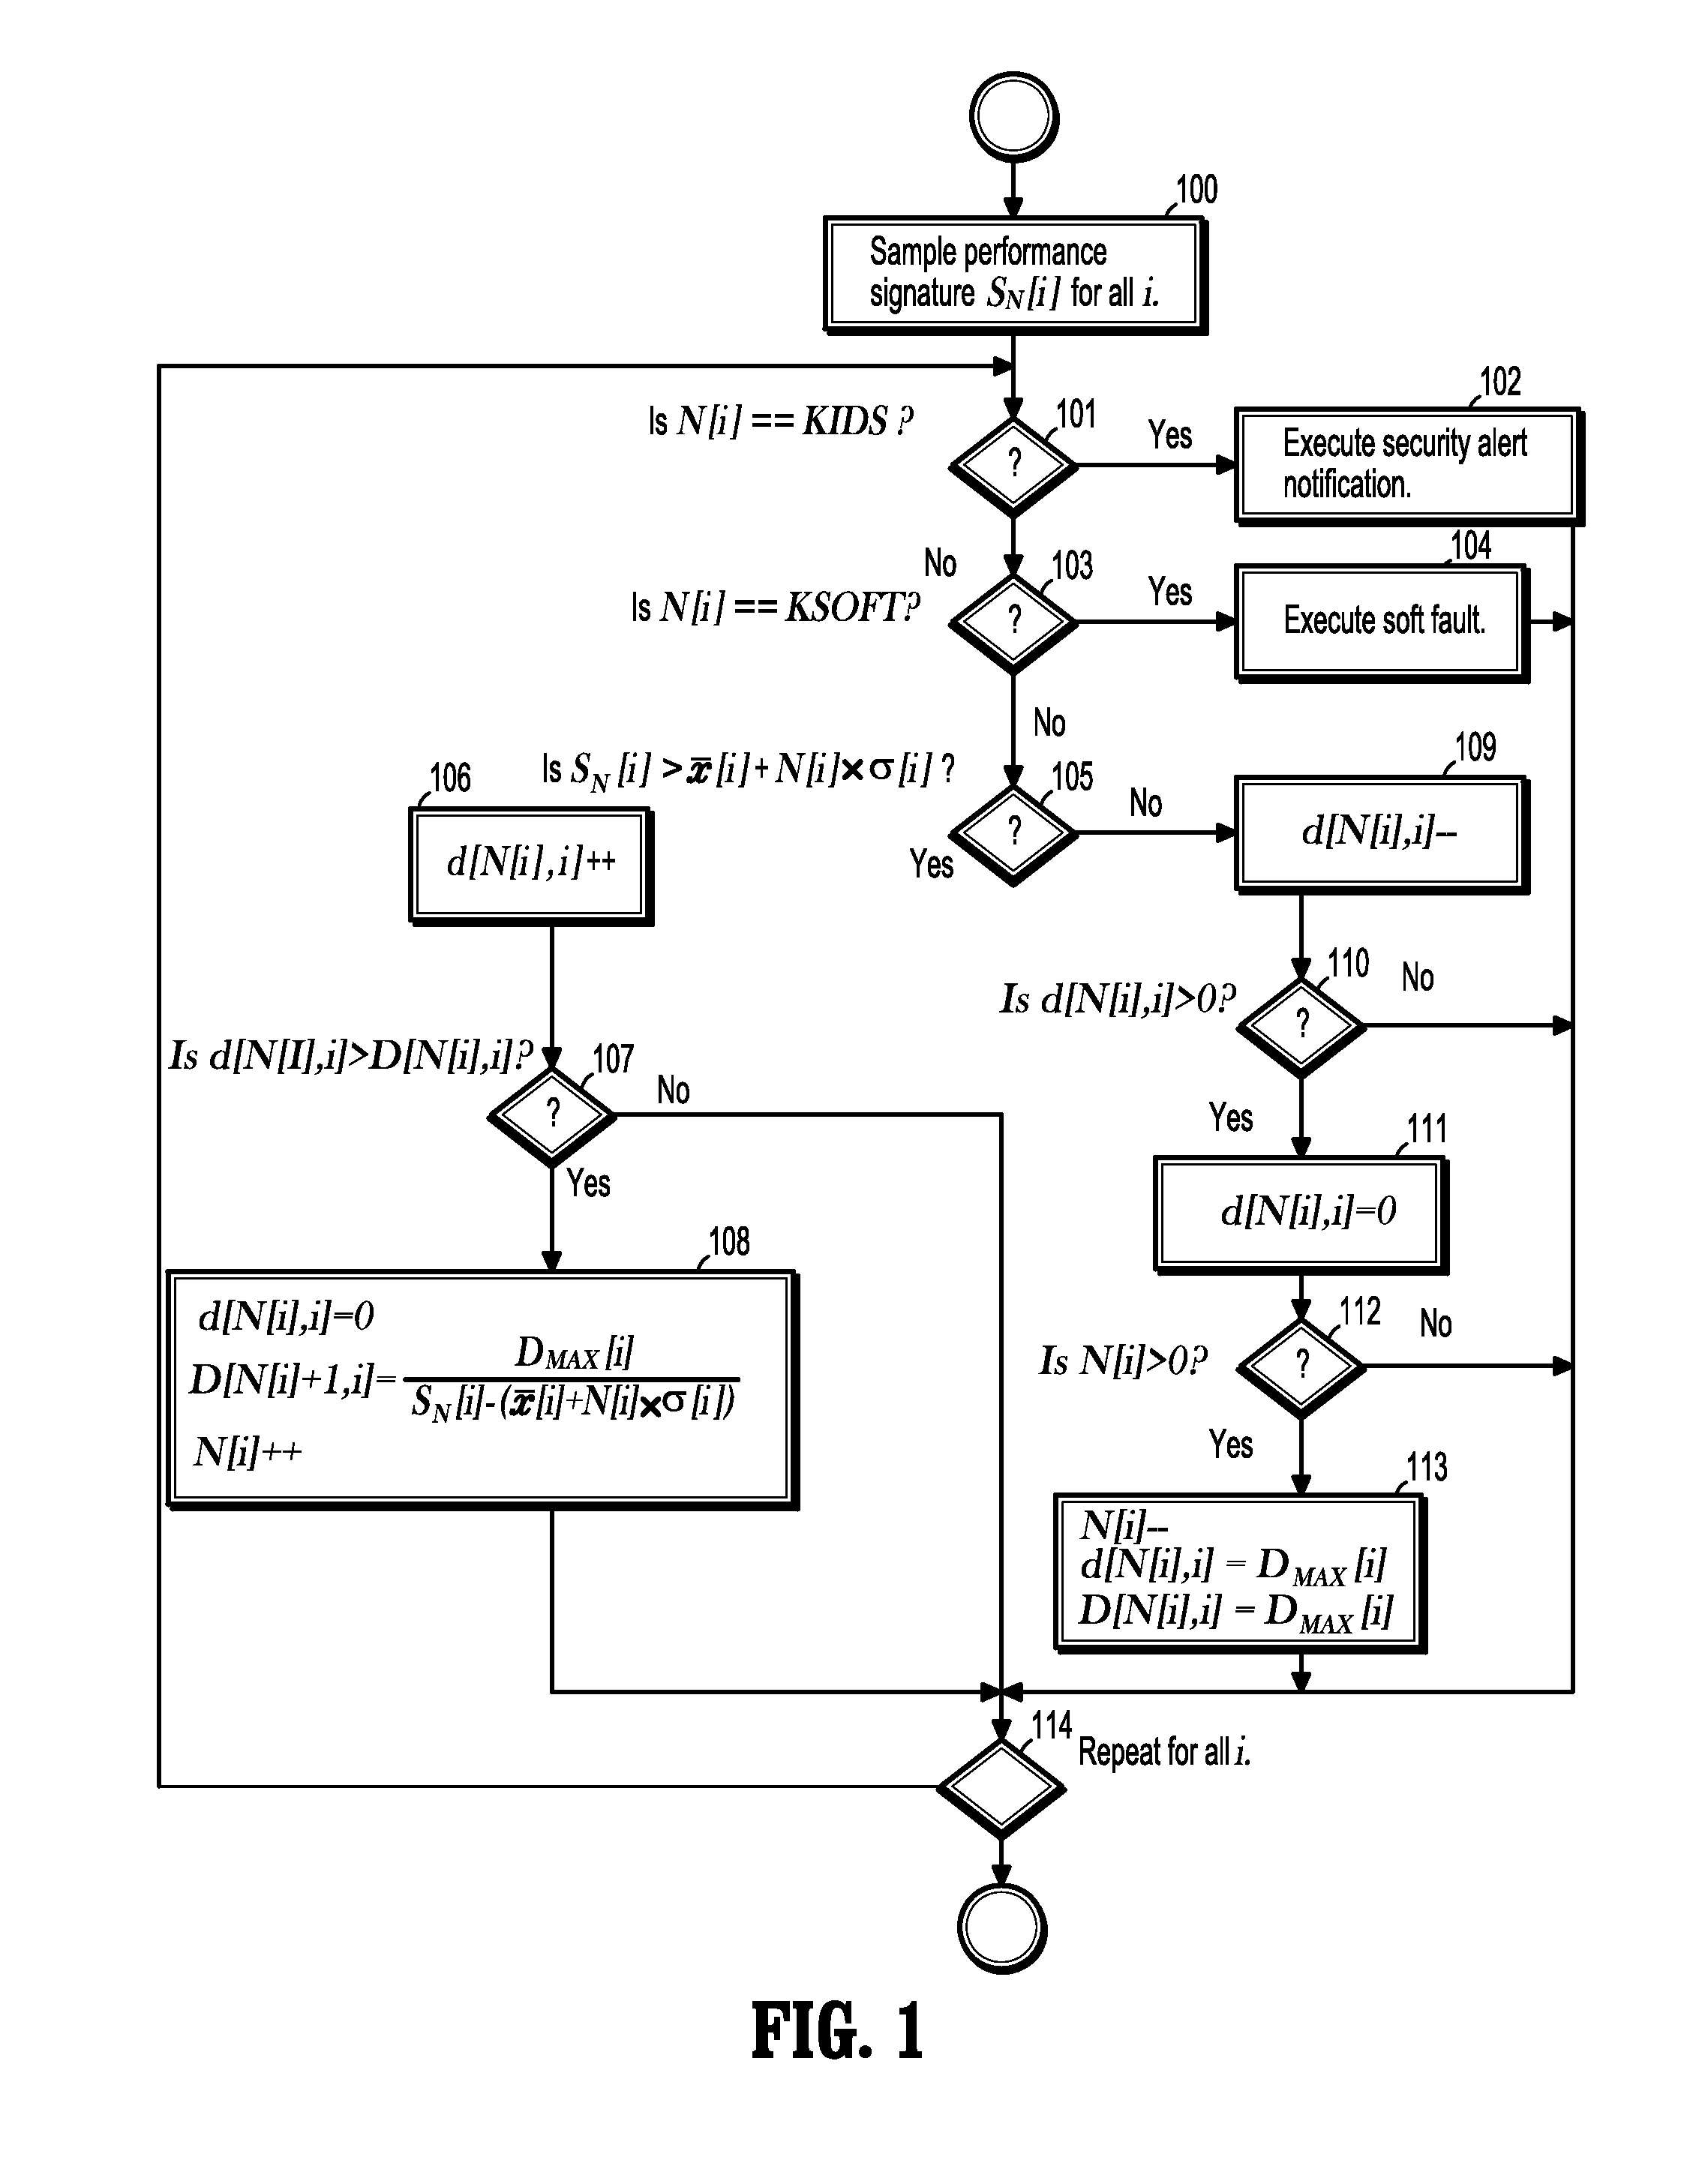 System and Method for Detecting Security Intrusions and Soft Faults Using Performance Signatures